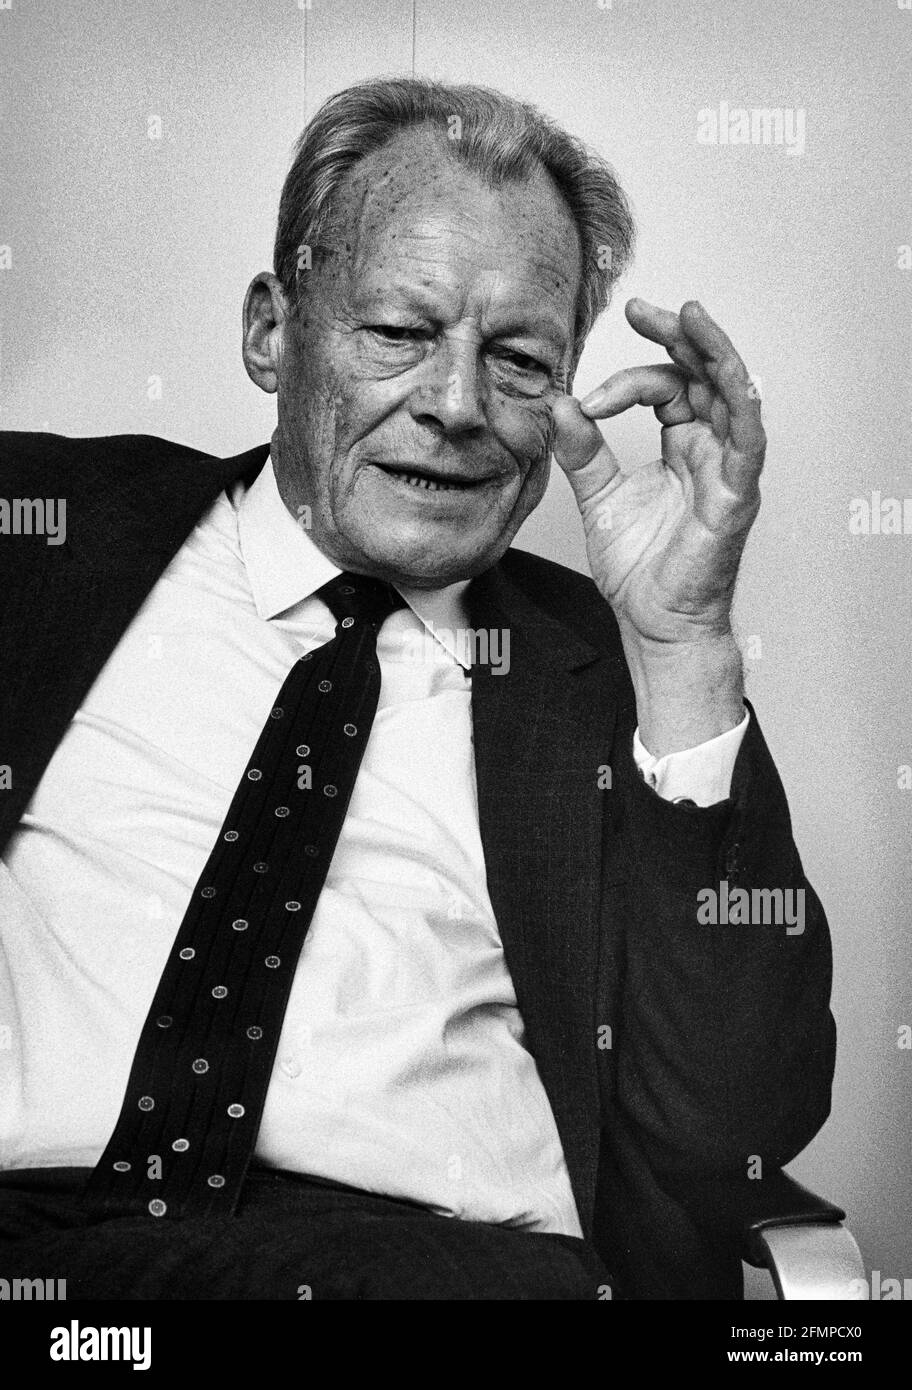 Gesticulating Willy Brandt, President of the Socialist International during an interview in his office in Bonn. 02.10.1985 - Christoph Keller Stock Photo